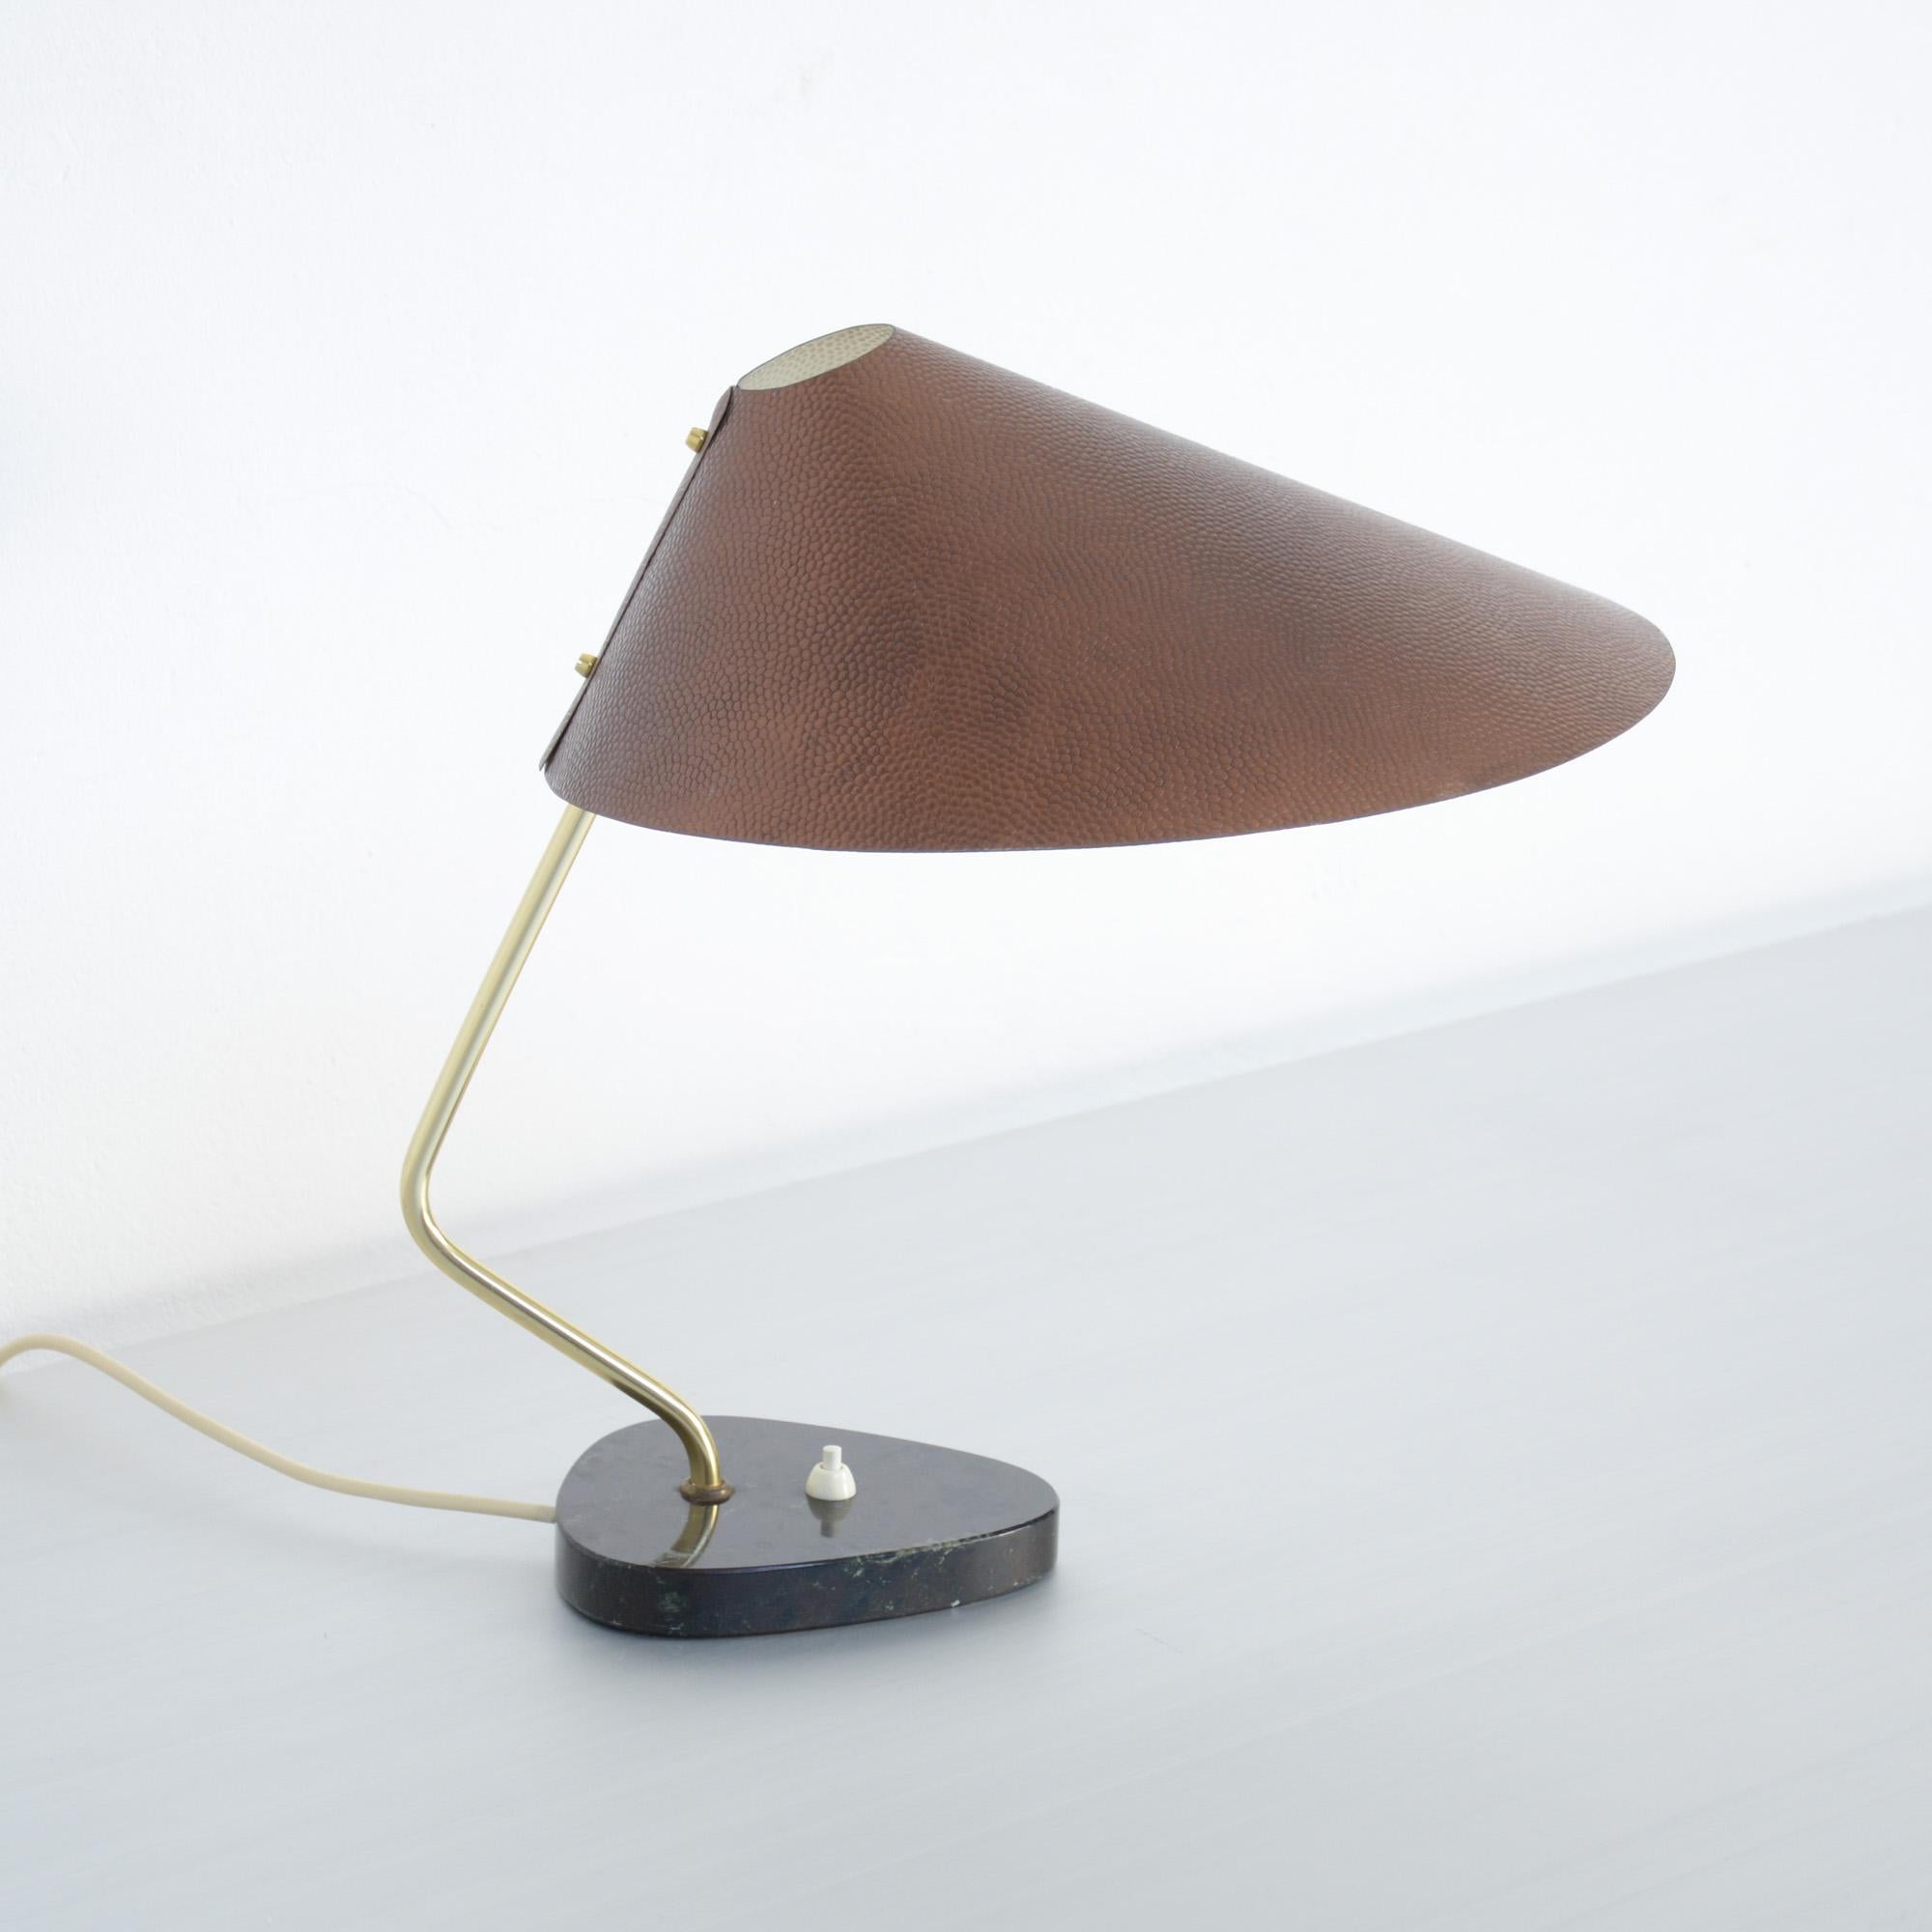 This amazing 1950s desk lamp is made in Germany.
It is a sophisticated design, with a asymmetrical black marble base, a brass modulated stem and an amazing copper-colored hammered aluminum shade.
This lamp is complete authentic from the 1950s and